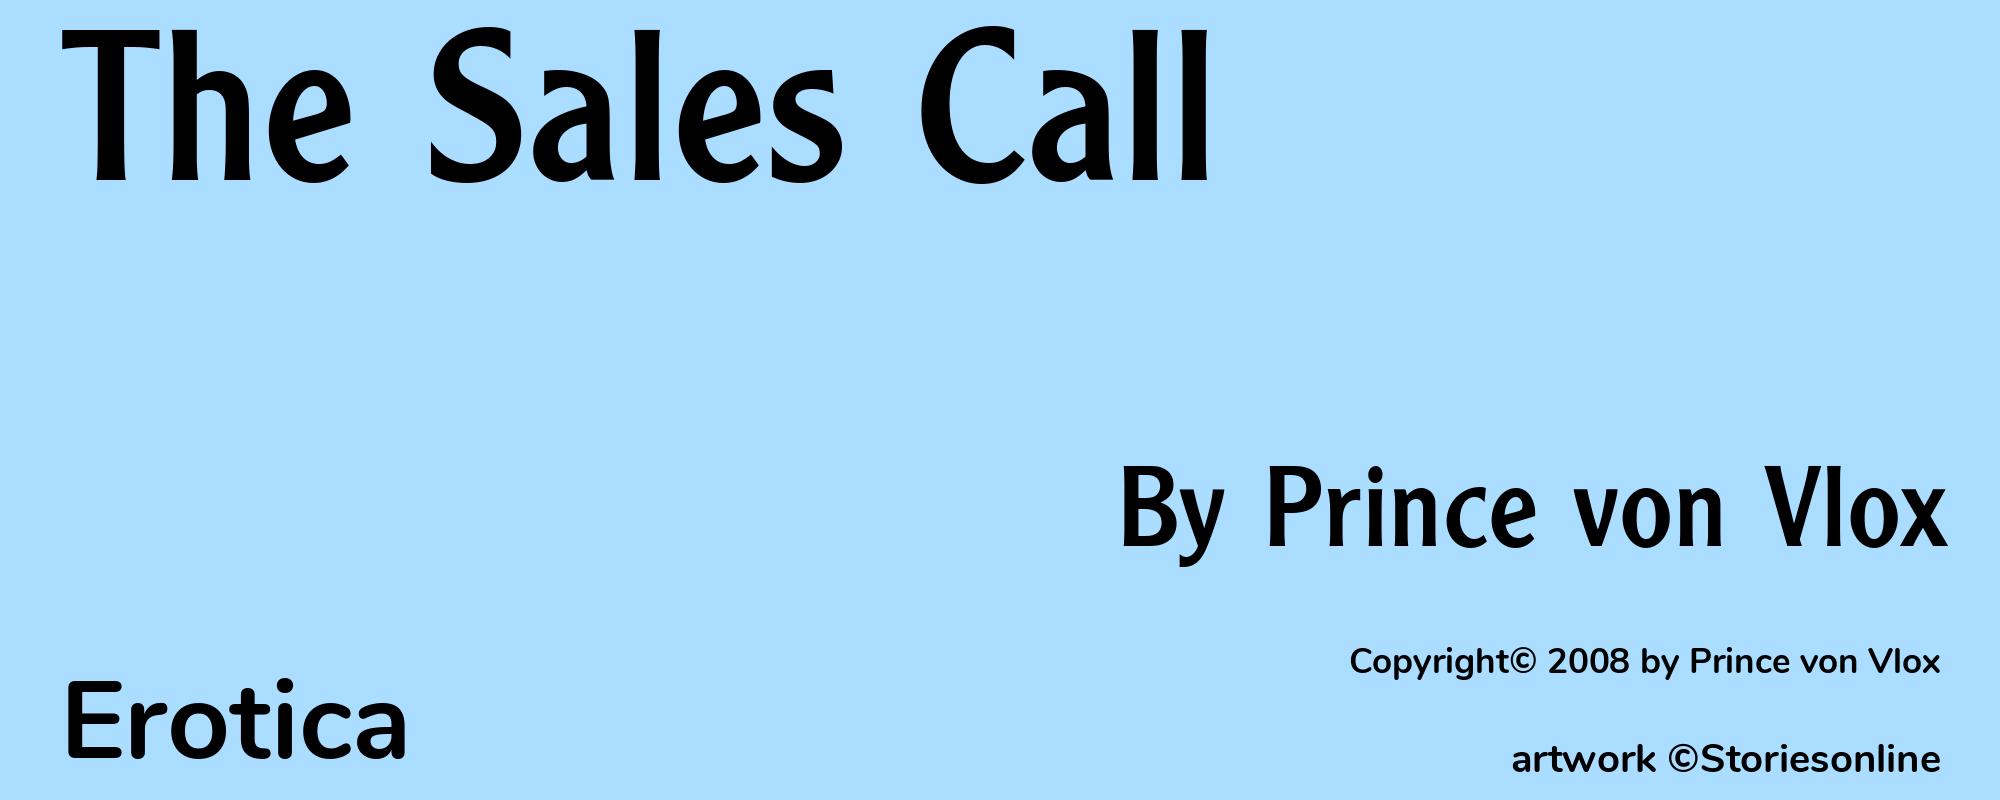 The Sales Call - Cover